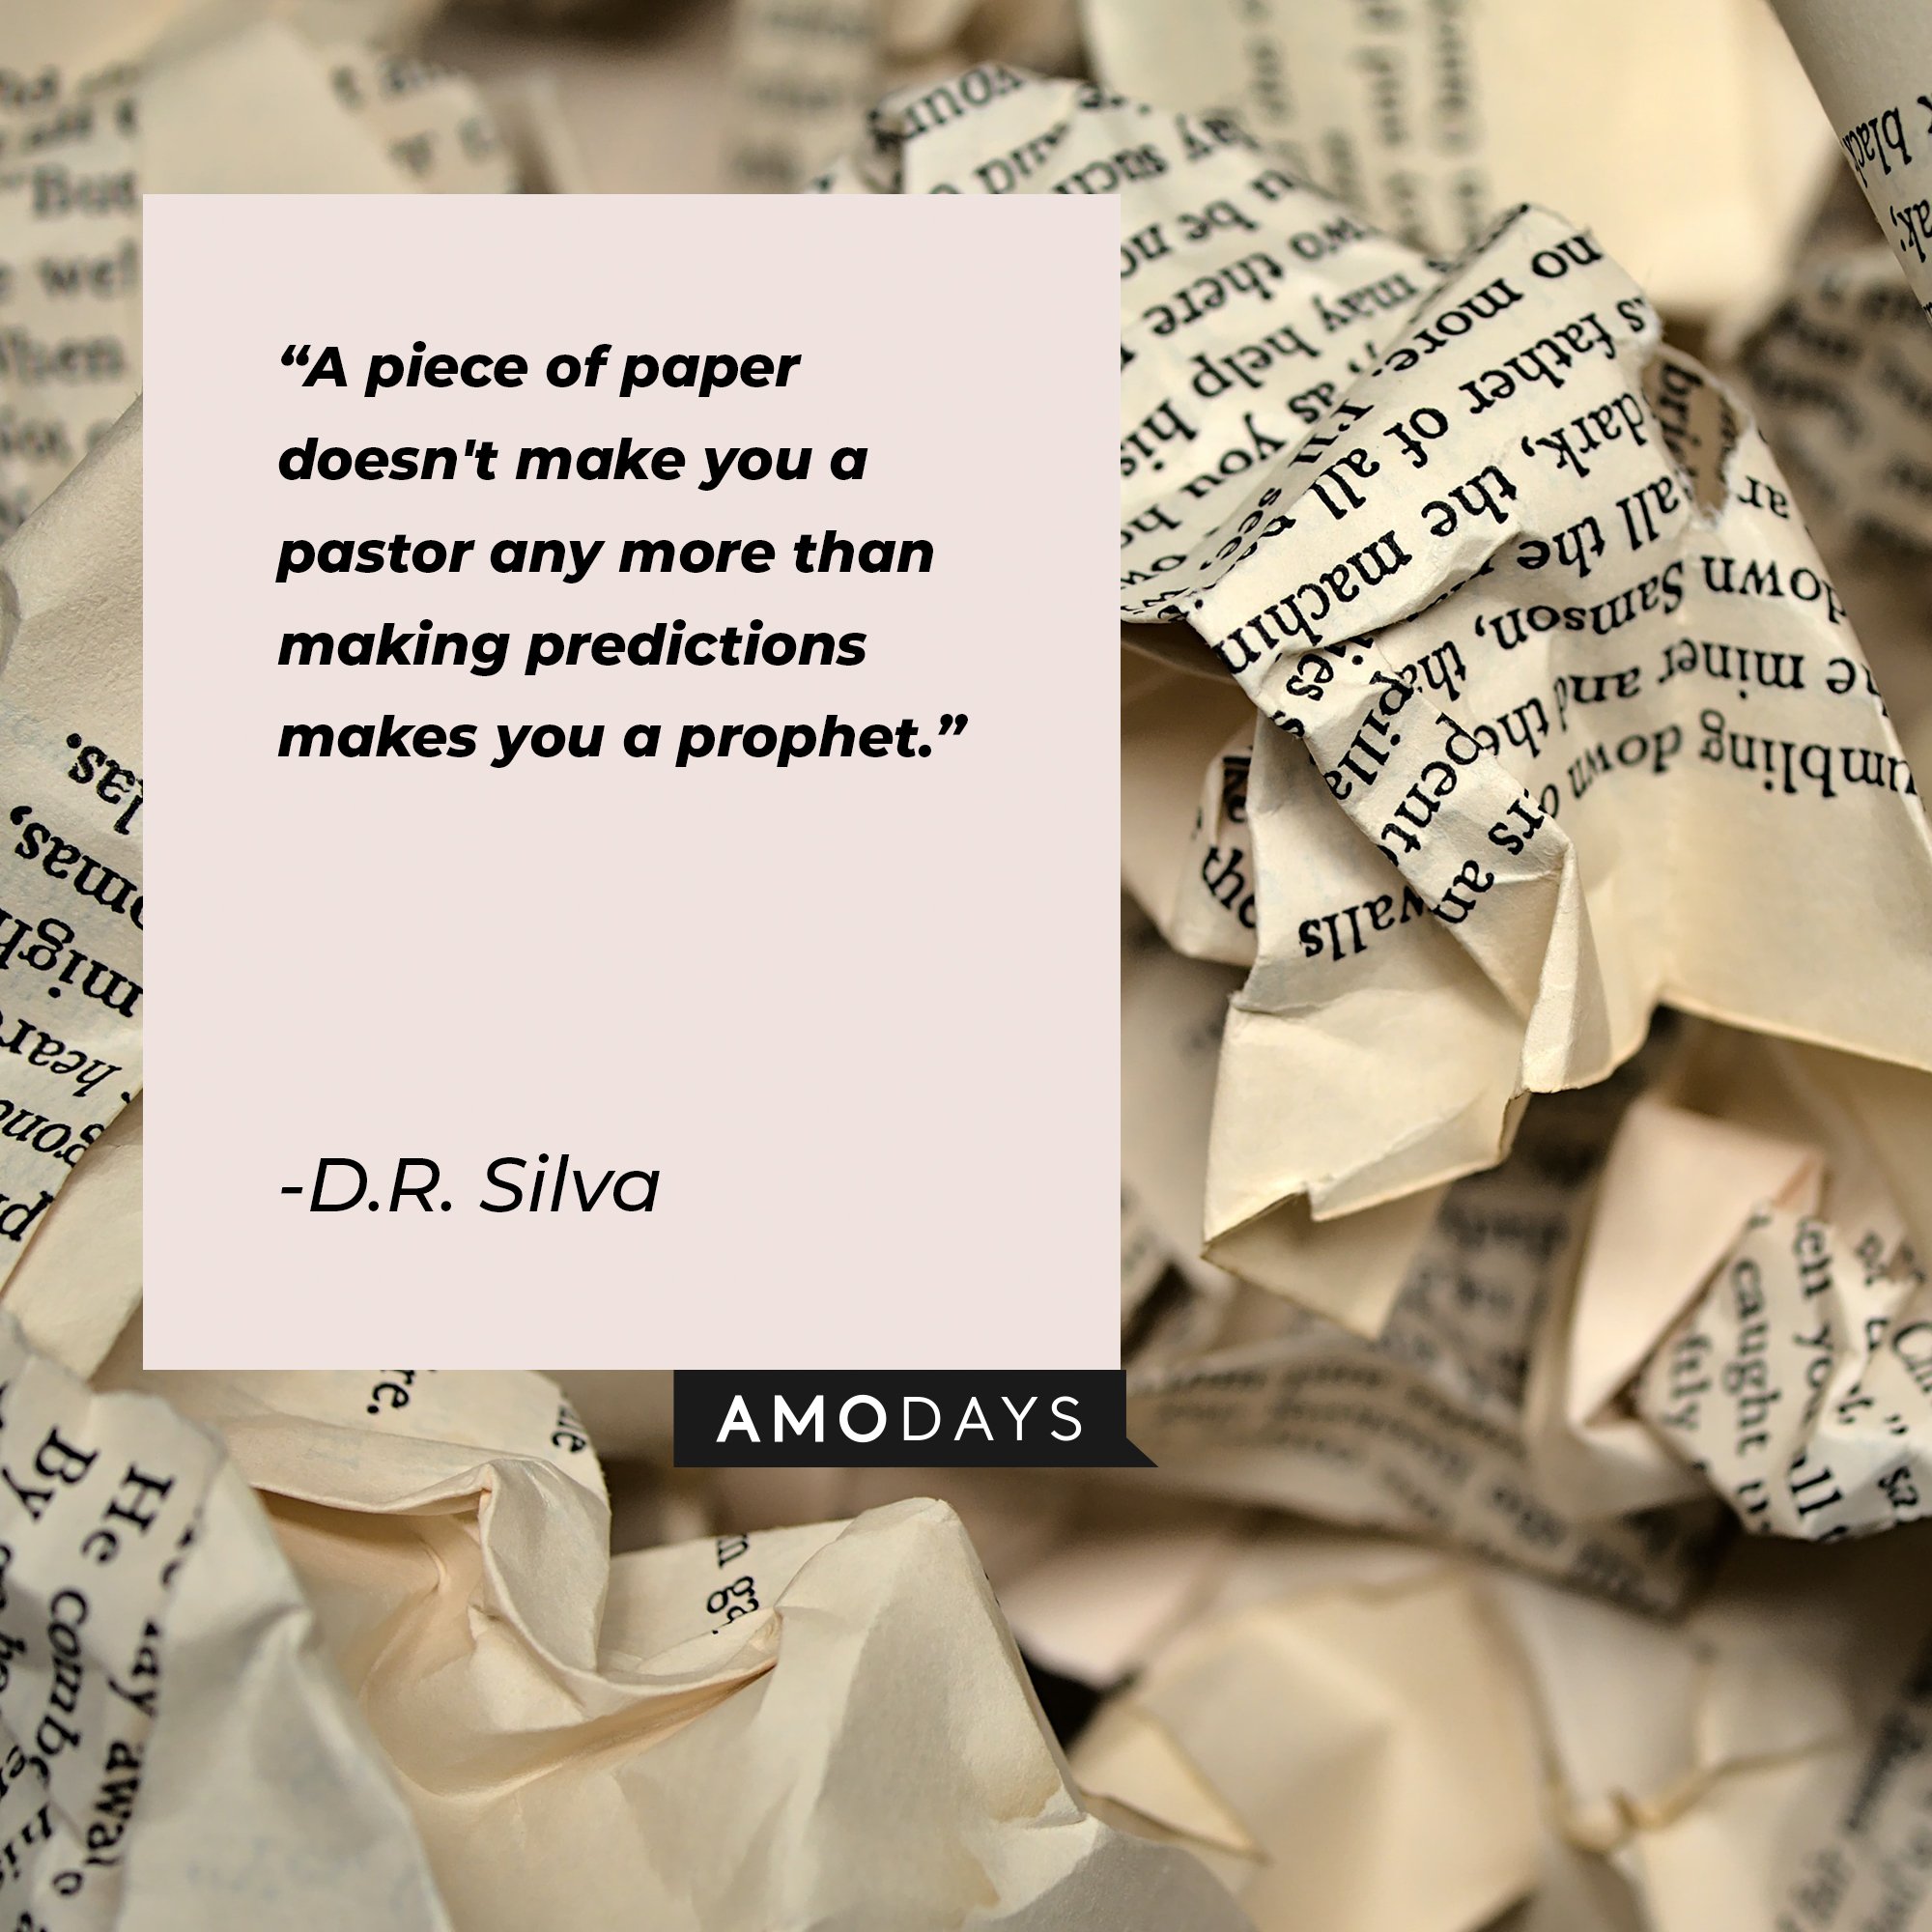  D.R. Silva’s quote: "A piece of paper doesn't make you a pastor any more than making predictions makes you a prophet." | Image: AmoDays